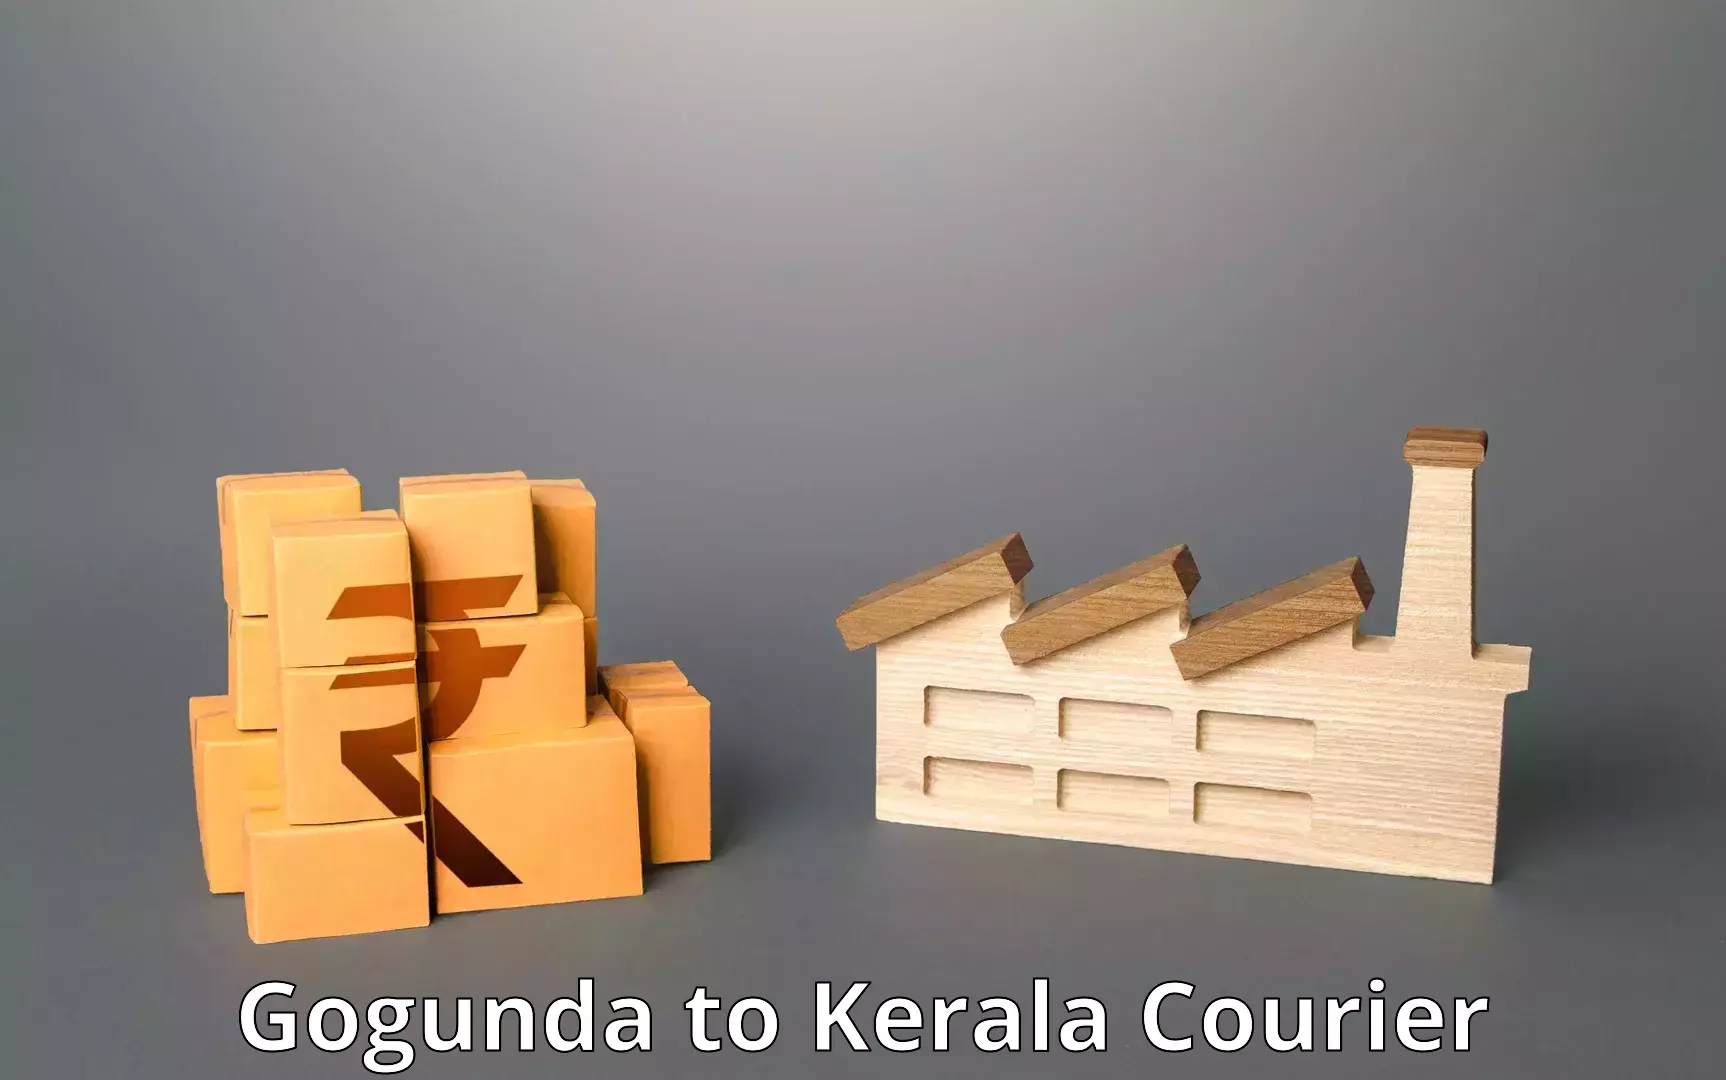 Express delivery network Gogunda to Alappuzha